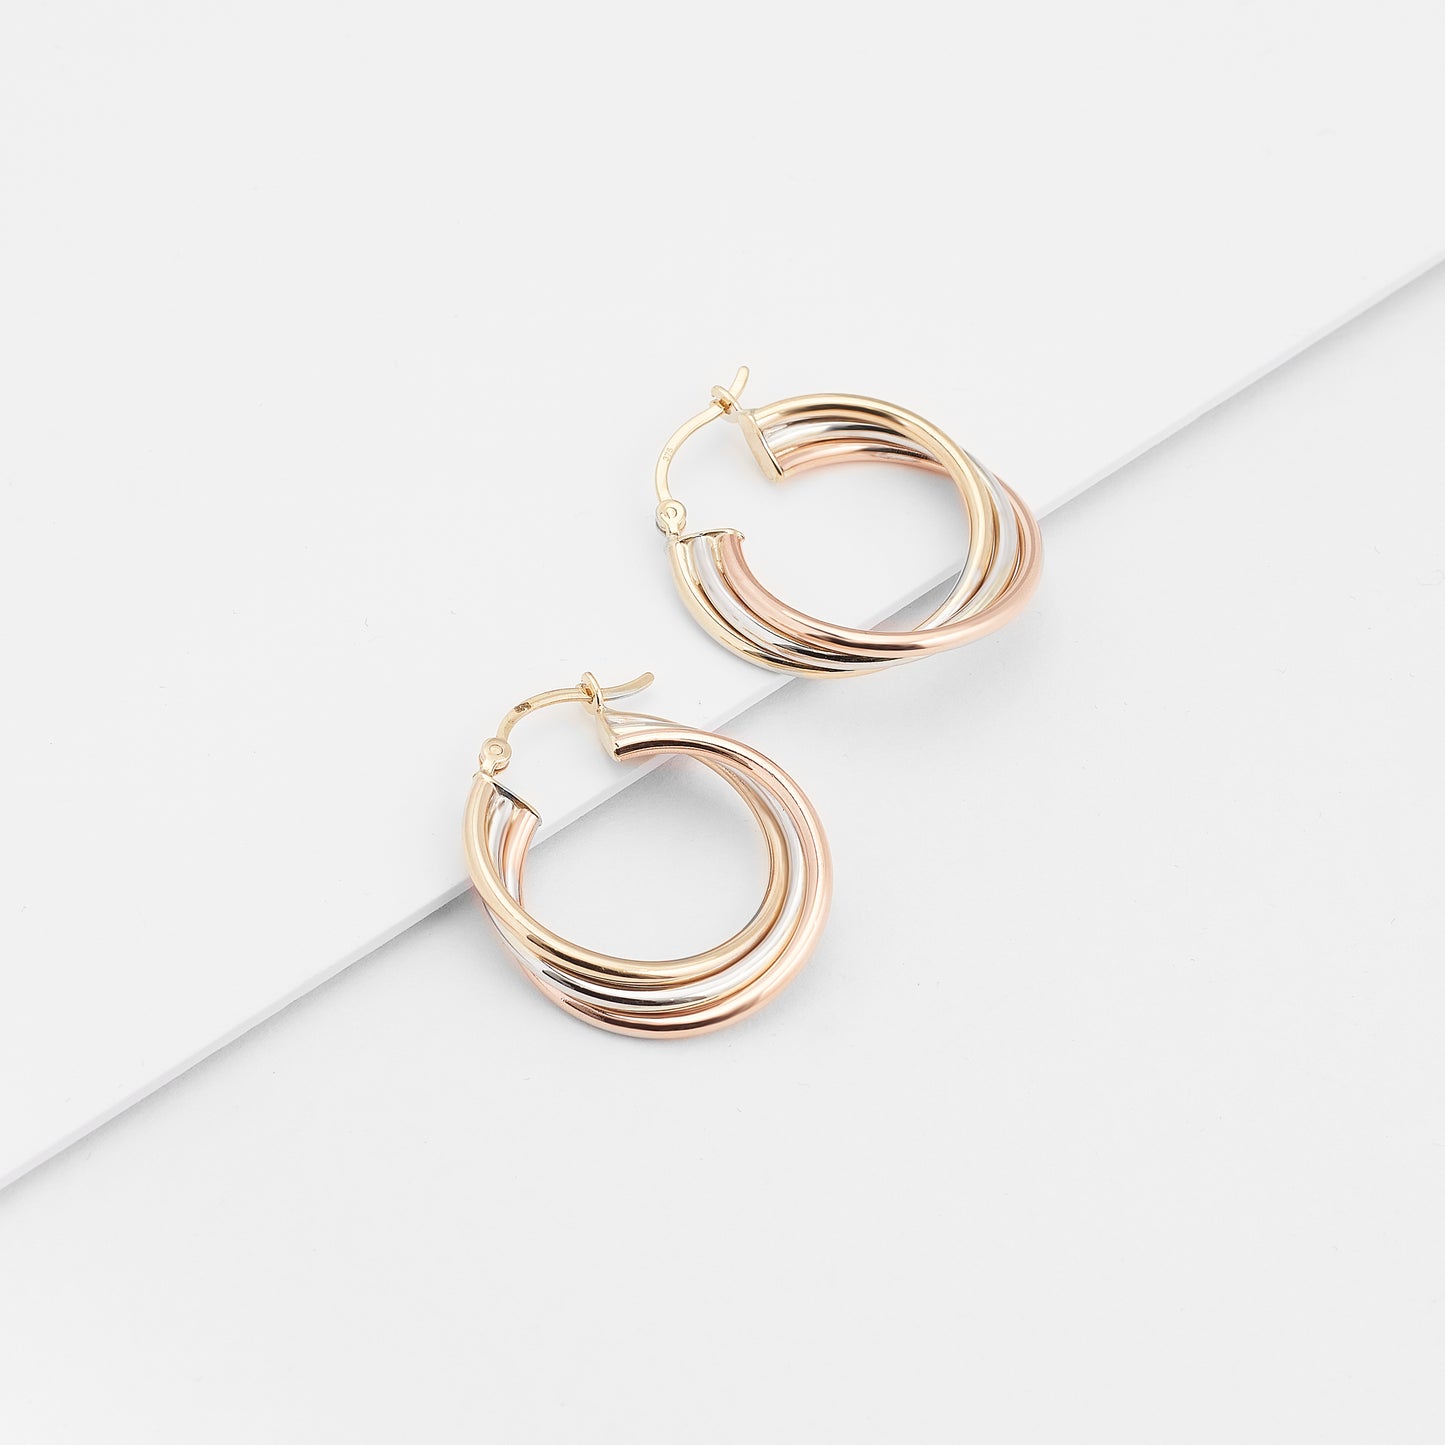 9K Yellow, Rose And White Gold Twist Hoop Earrings 22mm